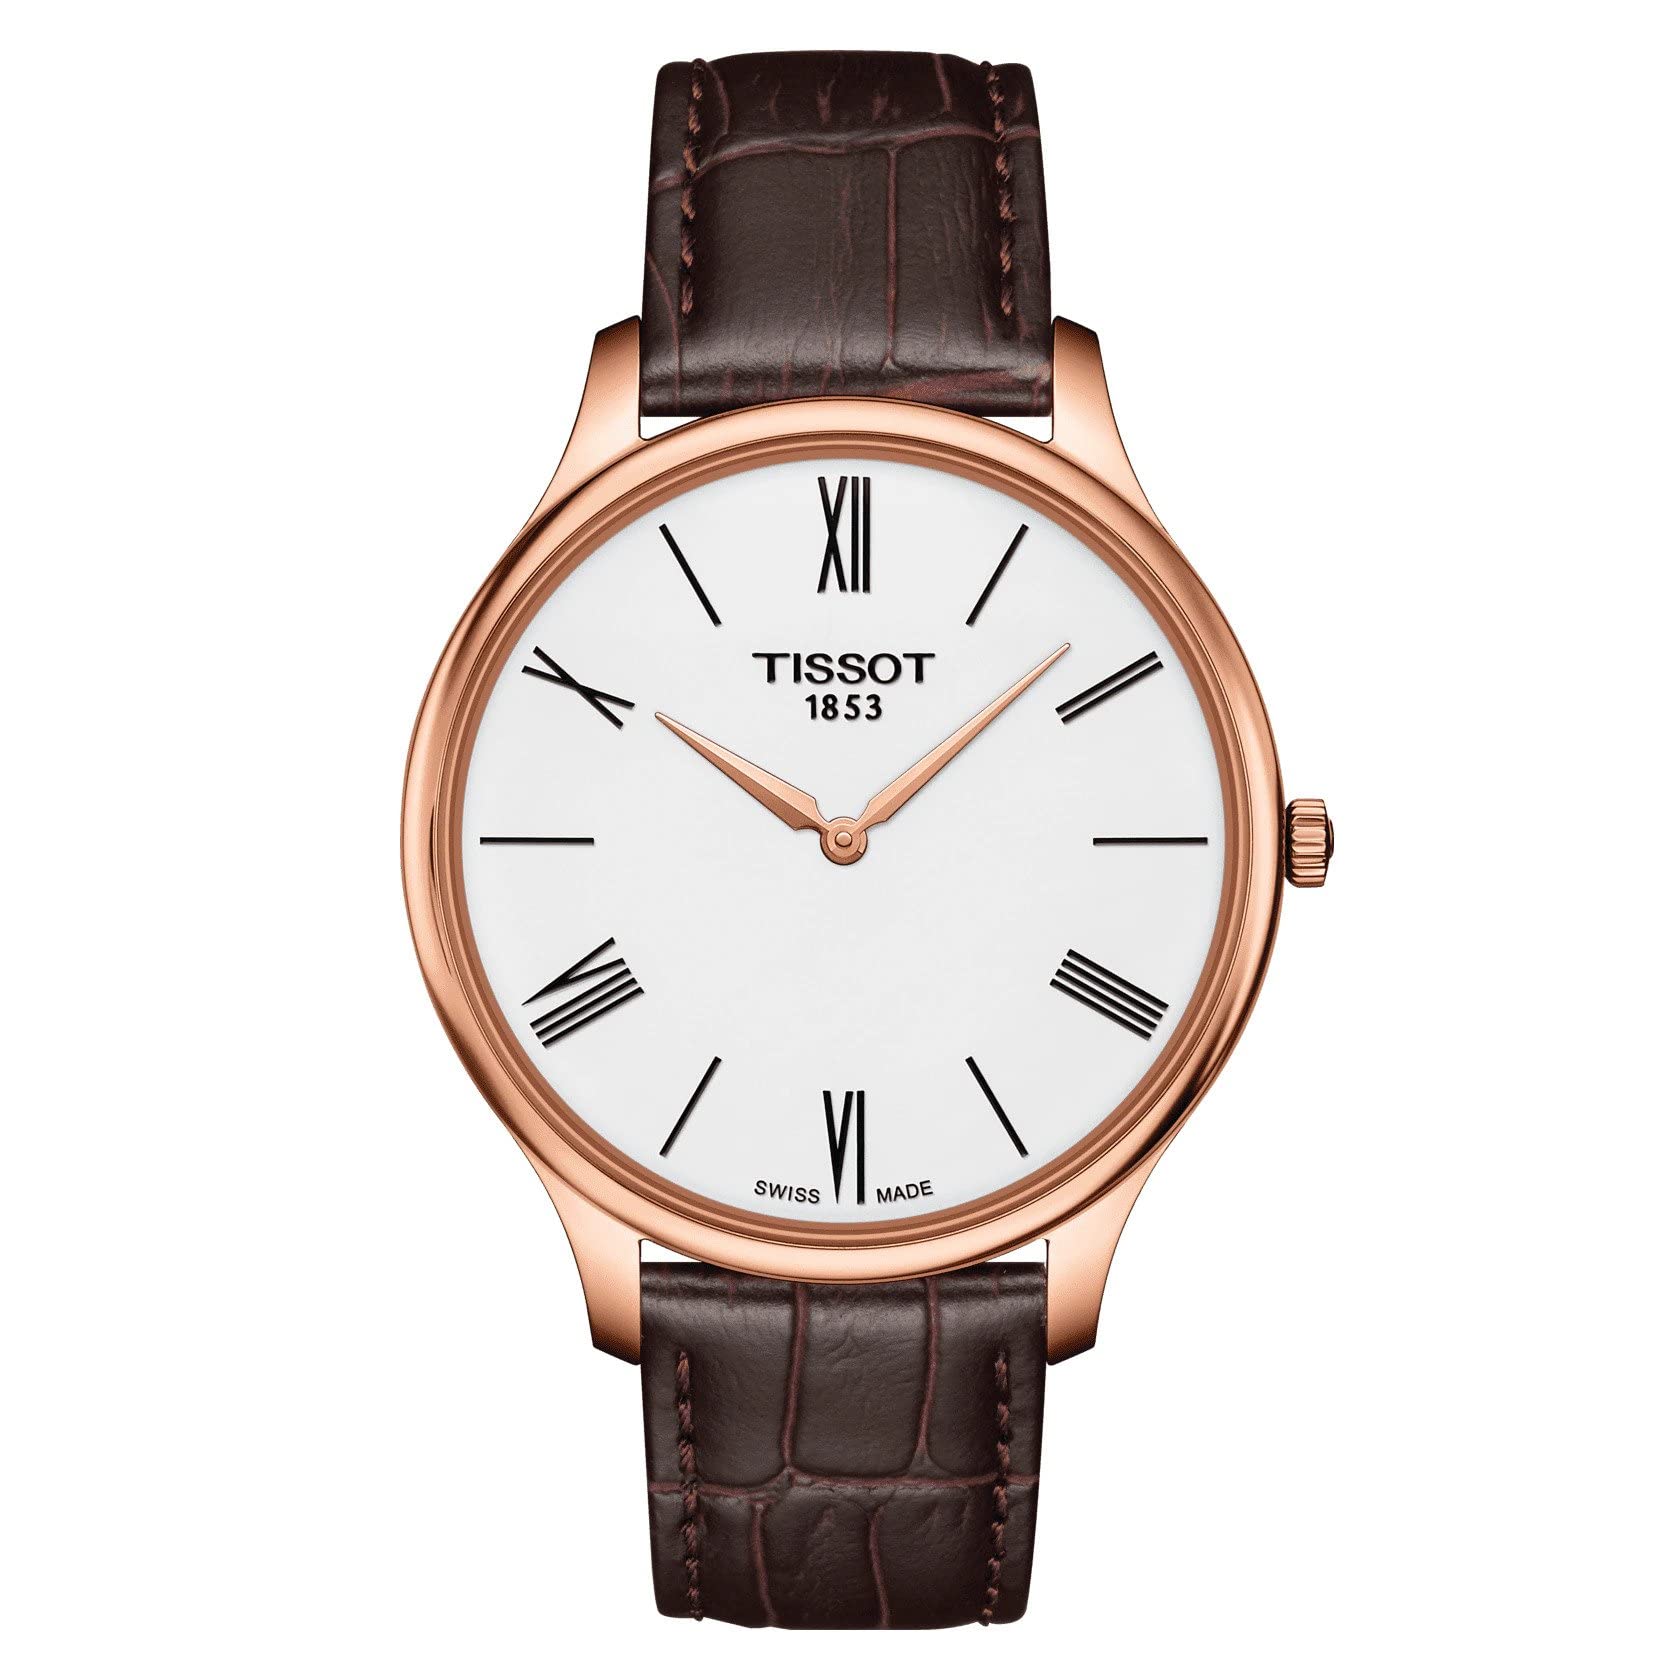 Tissot Mens Tradition 5.5 316L Stainless Steel case Swiss Quartz Watch, Brown, Leather, 18 (T0634093601800)